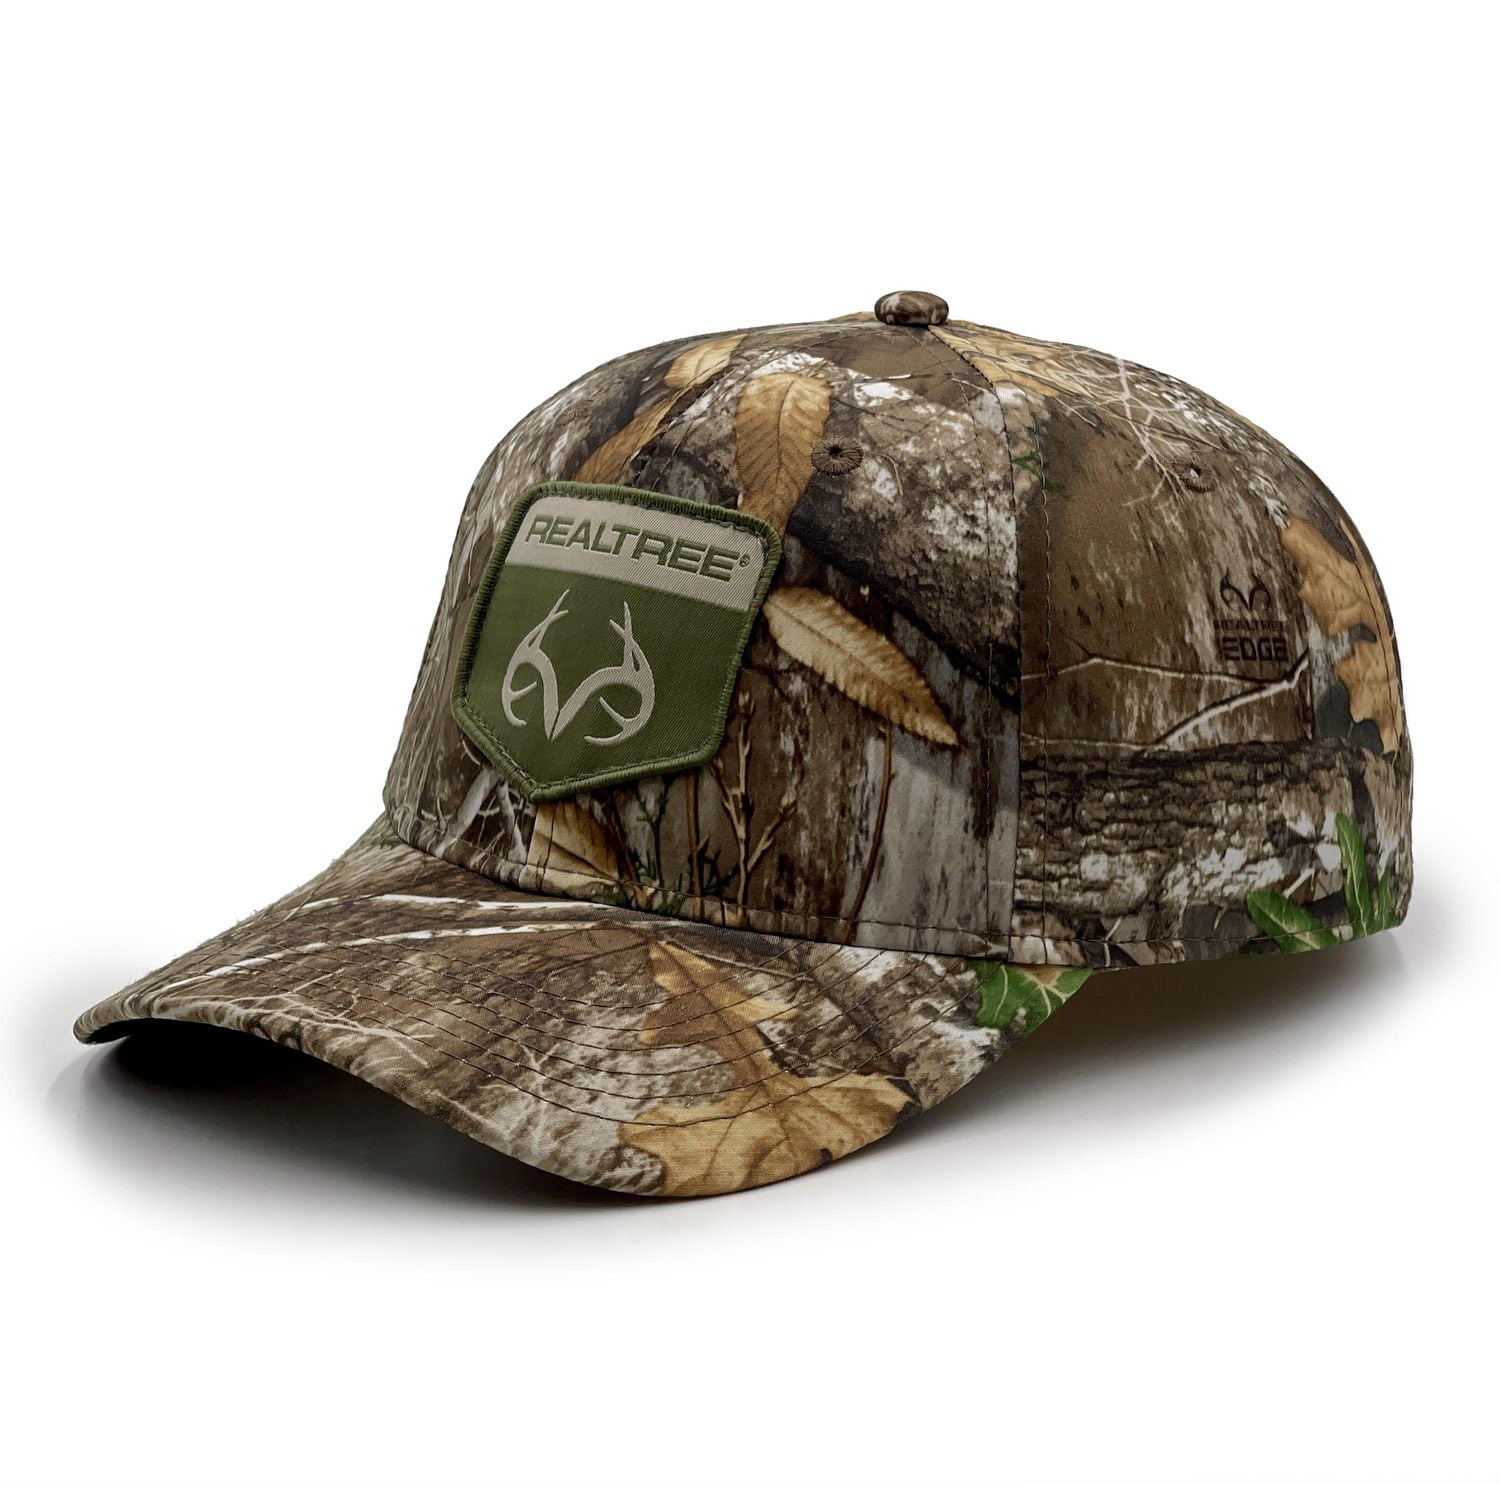 Realtree Hunting Structured Baseball Style Hat, Edge Camo, Large/Extra Large